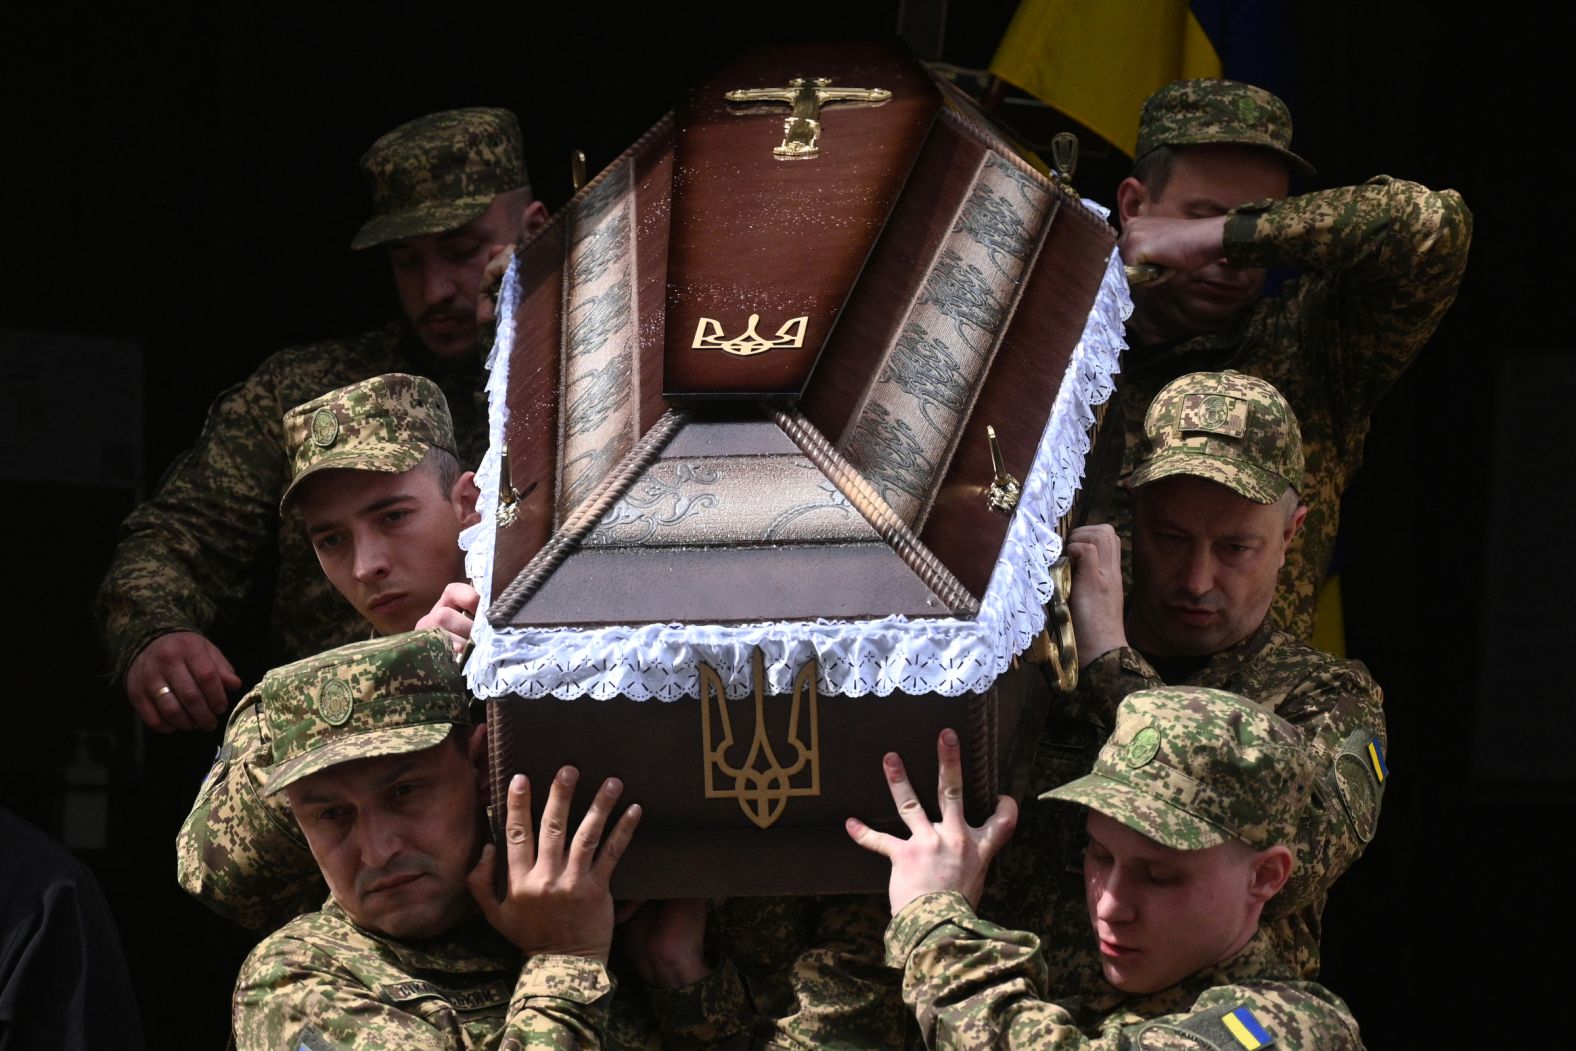 Ukrainian soldiers carry the coffin of serviceman Taras Osmyakevych at his funeral in Lviv, Ukraine, on Thursday, May 2. Osmyakevych was killed in action during the ongoing war with Russia.